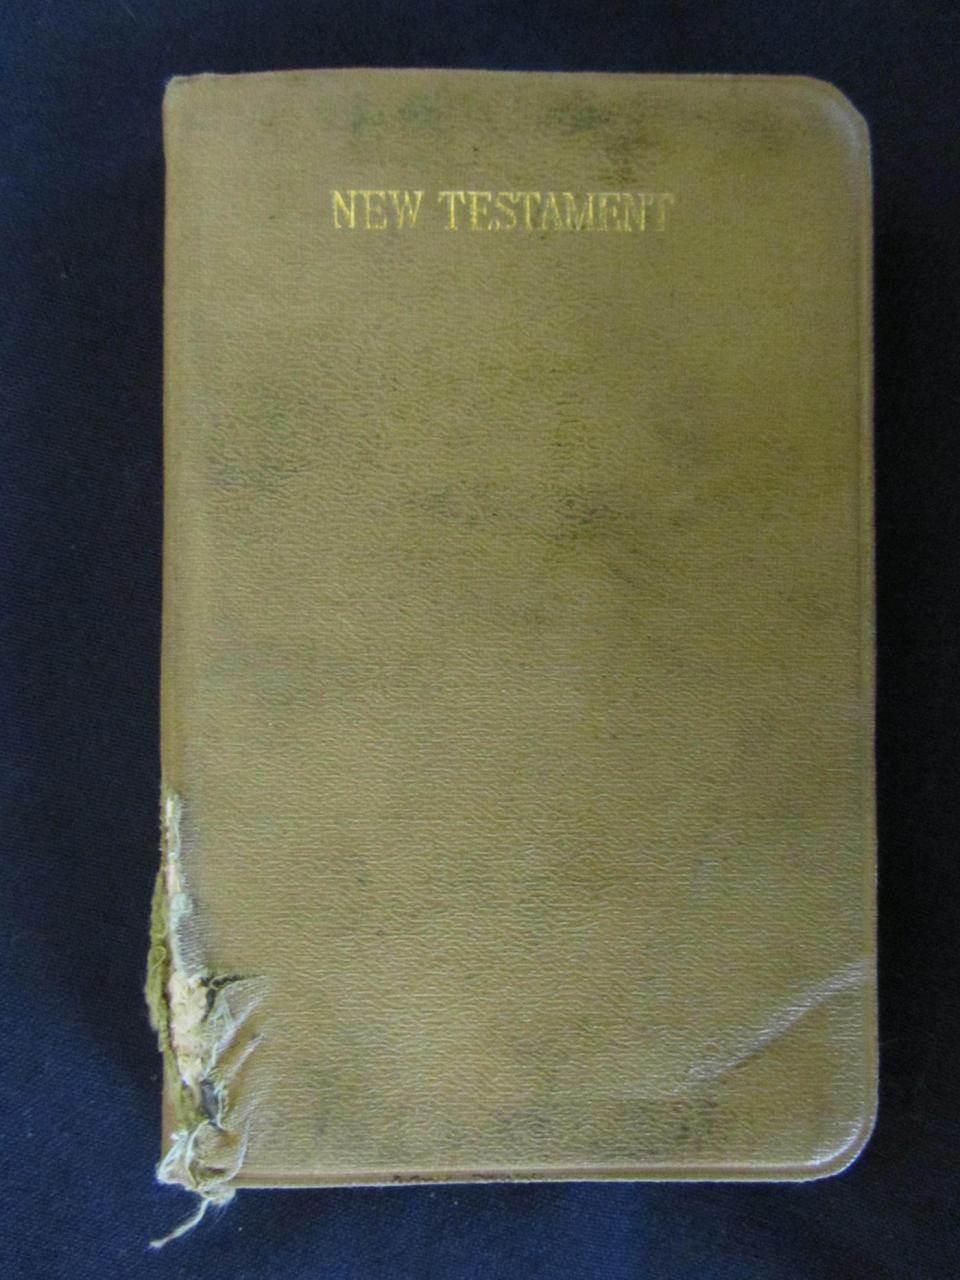 Bible, front cover.